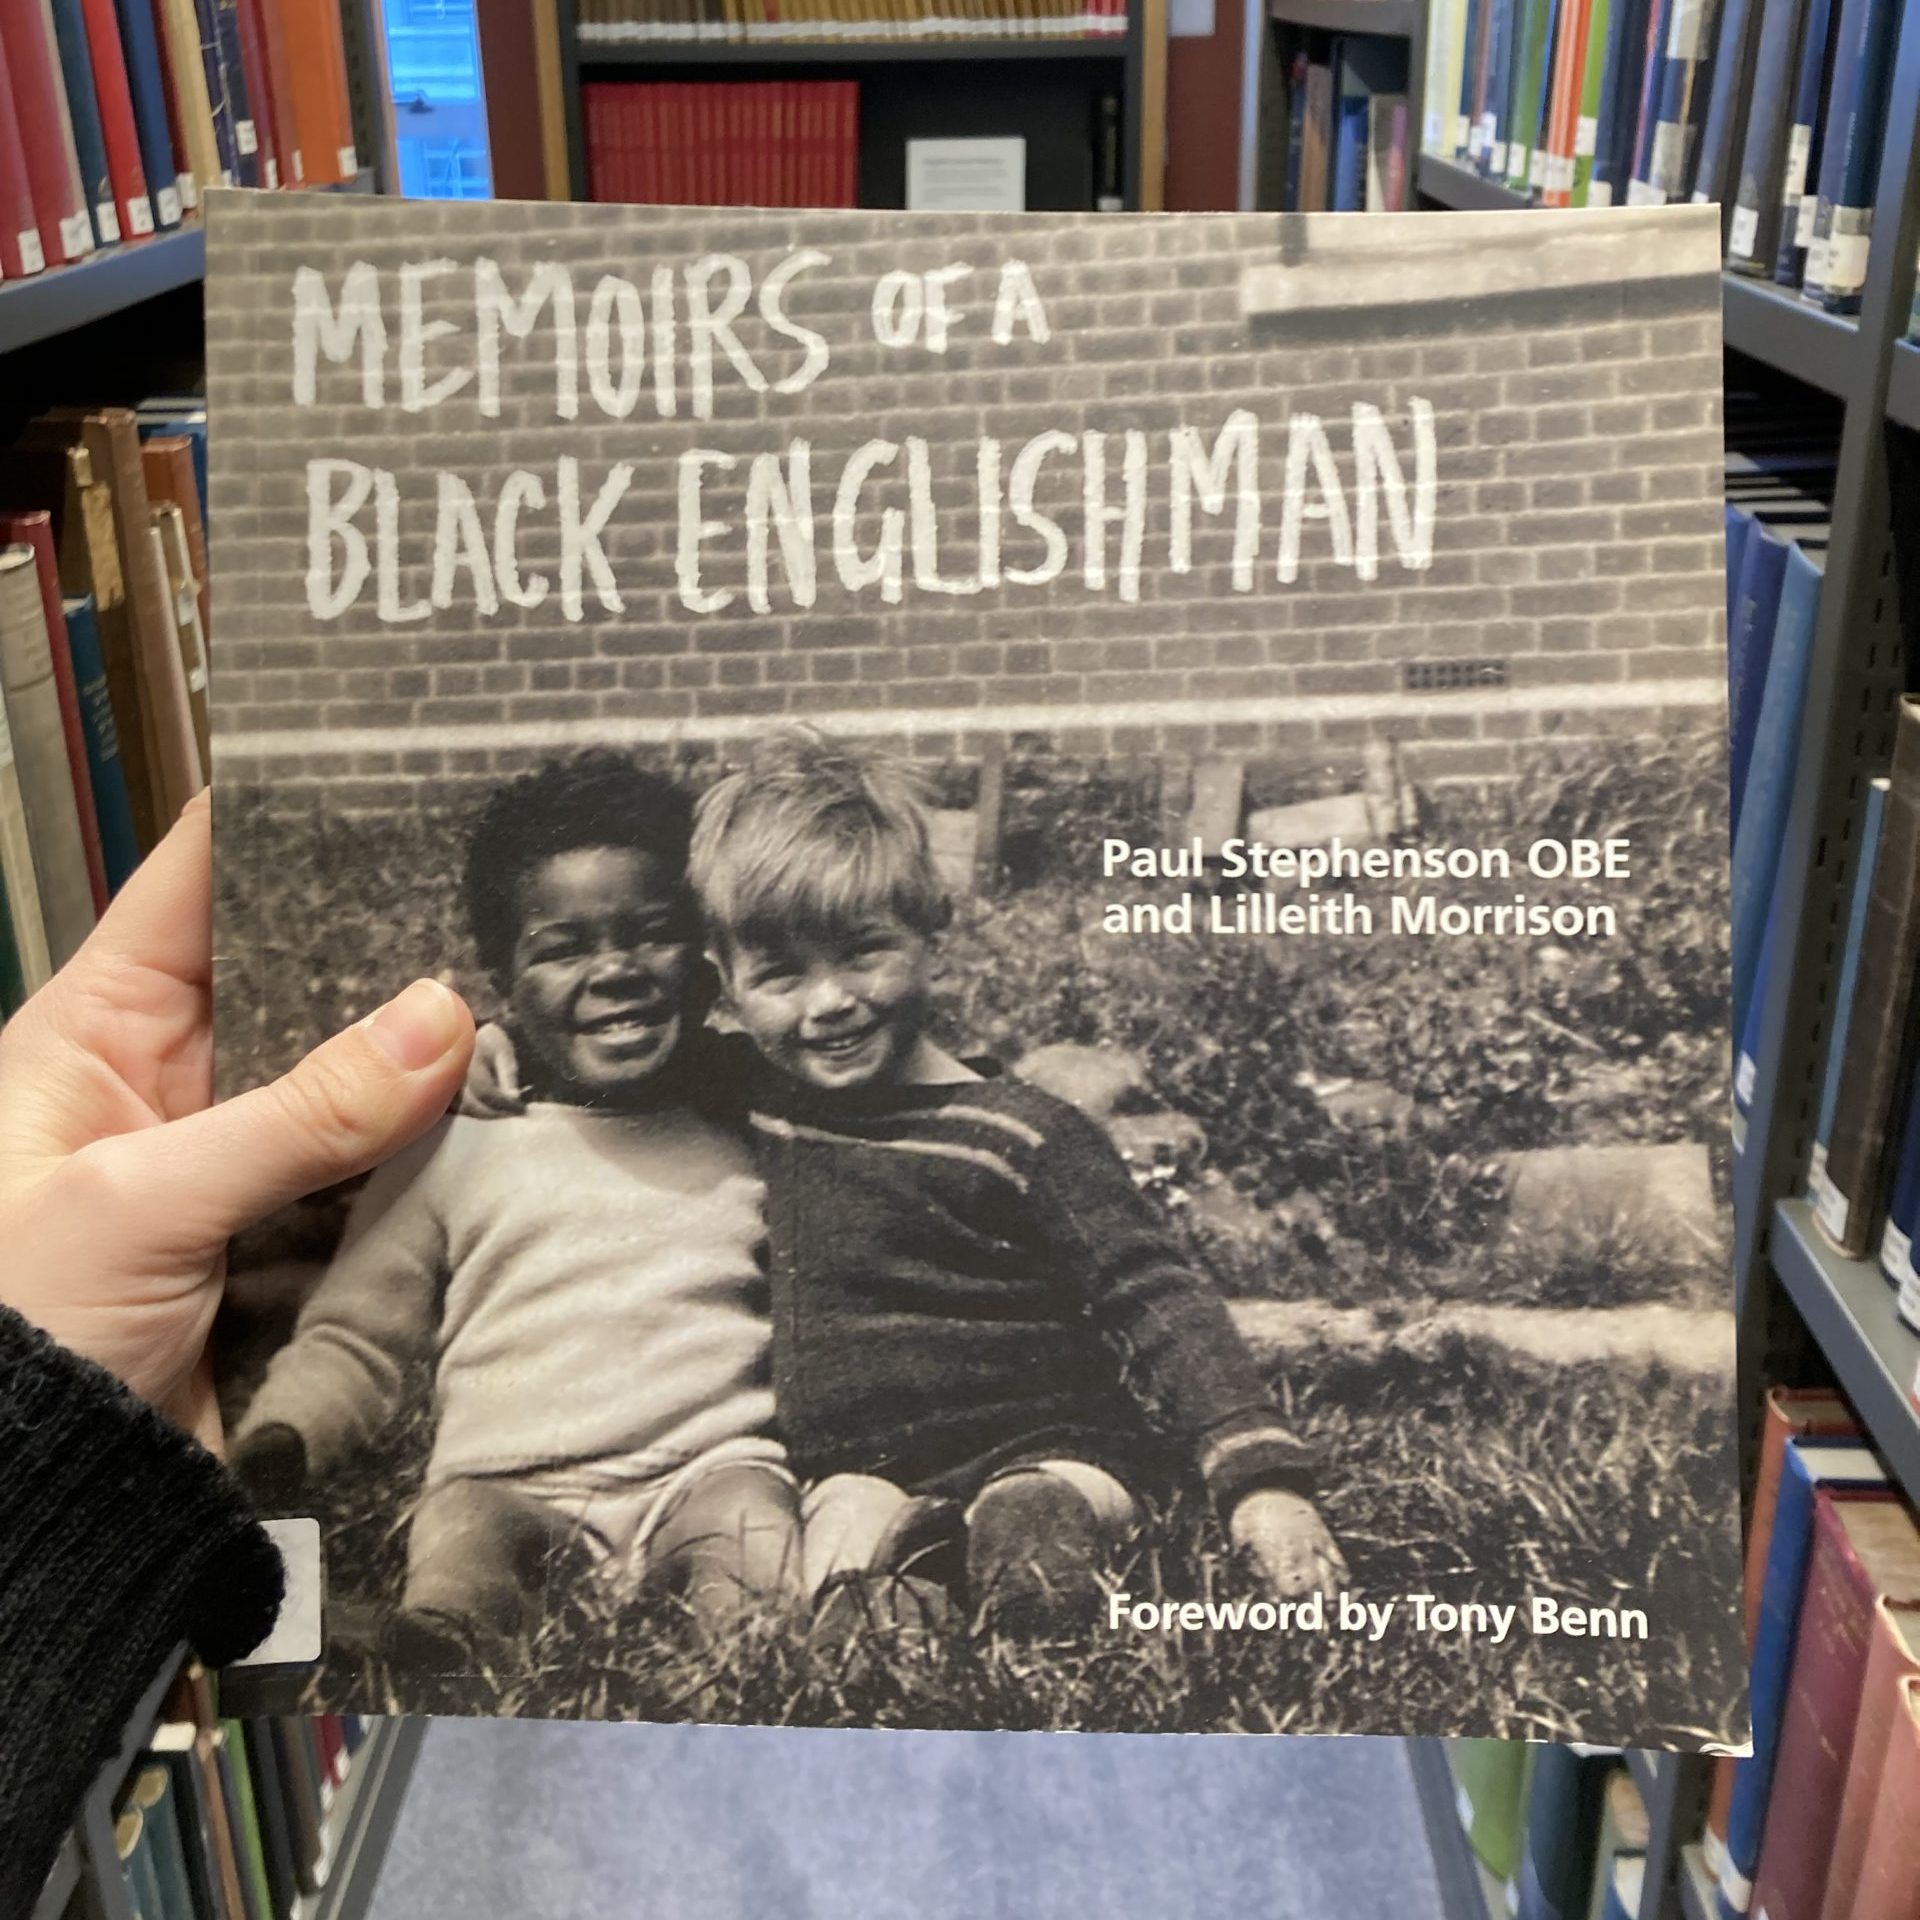 A view of the front cover of 'Memoirs of a Black Englishman' being held up in between two bookcases